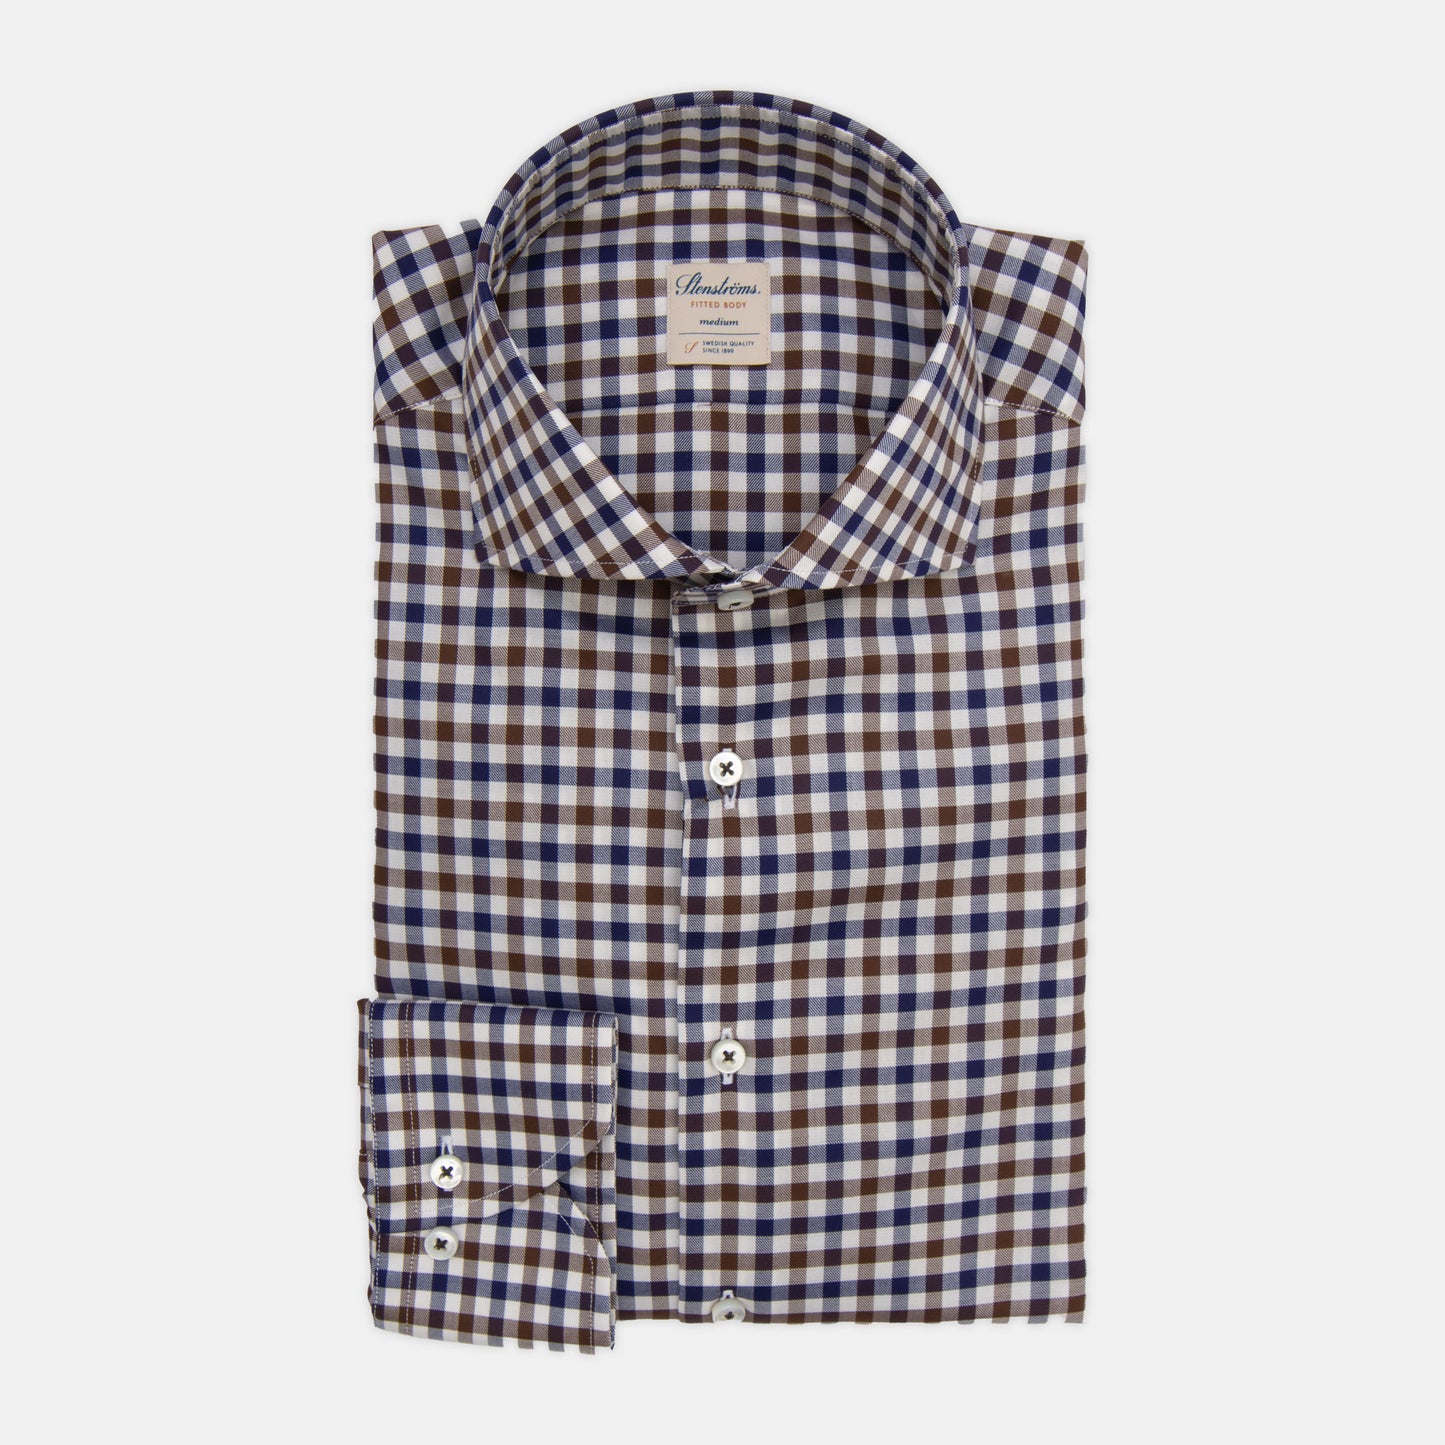 Stenstroms - Gingham Check Cotton Shirt in Brown and Blue